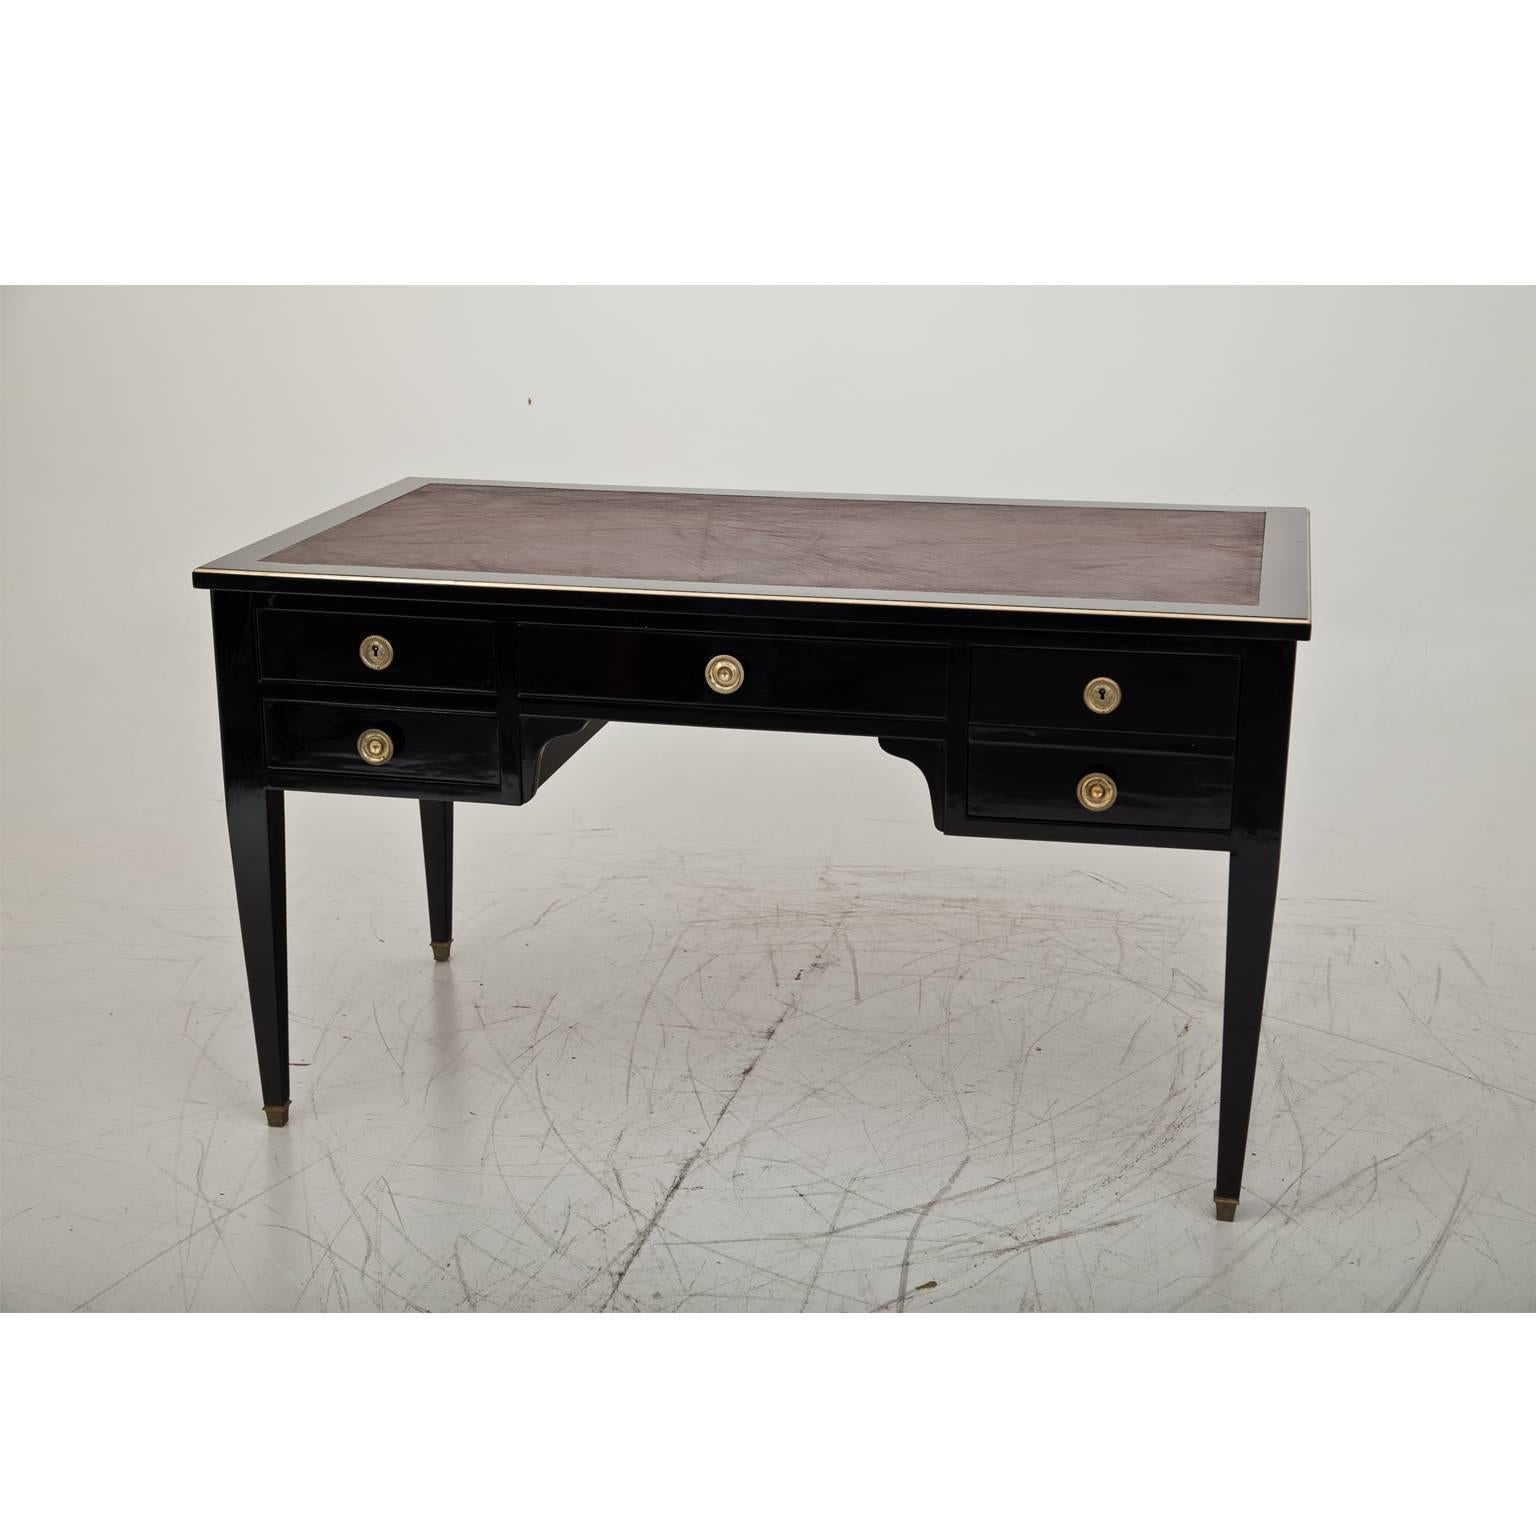 Five-drawered, newly ebonized Empire-style desk from 1880 on tapered legs with brass sabots and brown vinyl-leather surface.
  